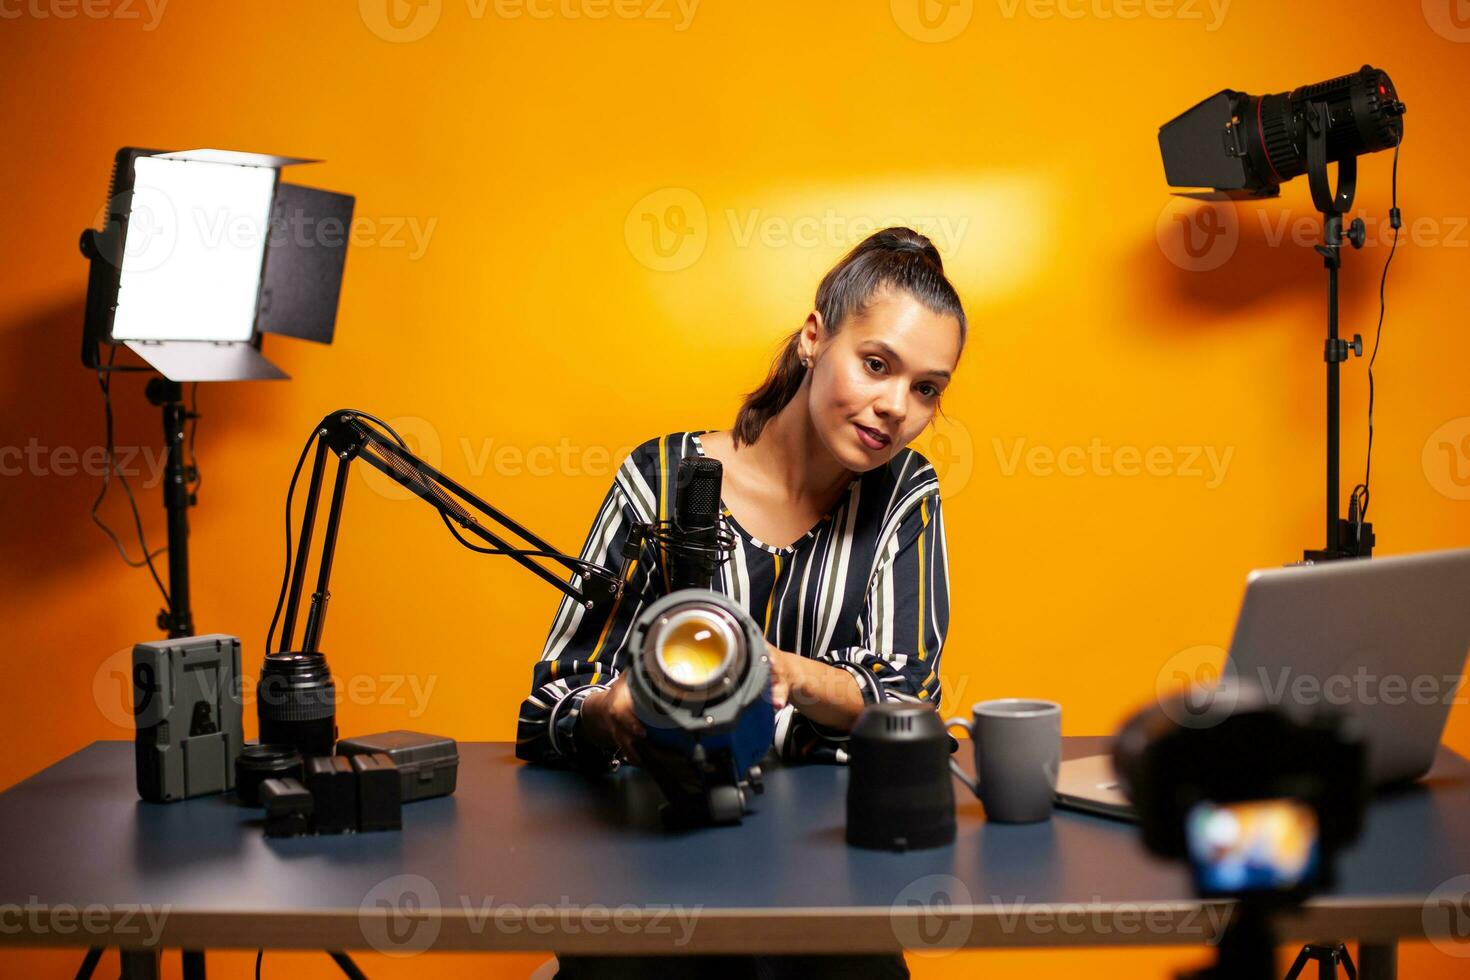 Presenting studio light for vlog production in home studio. Social media star making online internet content about video equipment for web subscribers and distribution, film photo